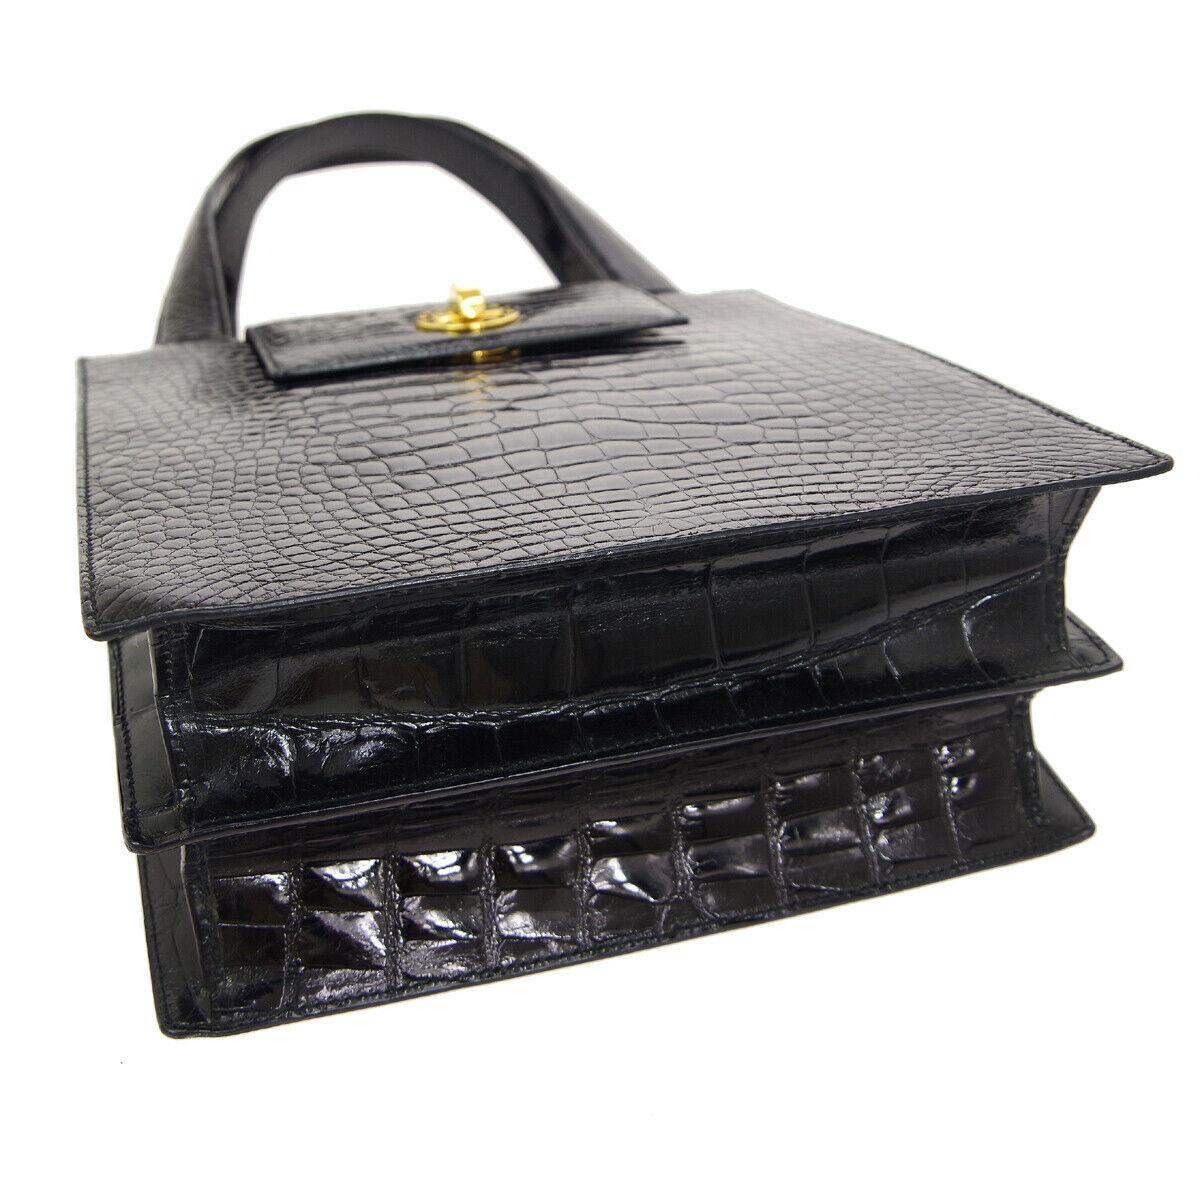 Crocodile
Leather
Gold tone hardware
Turnlock closure
Leather lining
Made in Italy
Handle drop 5.5